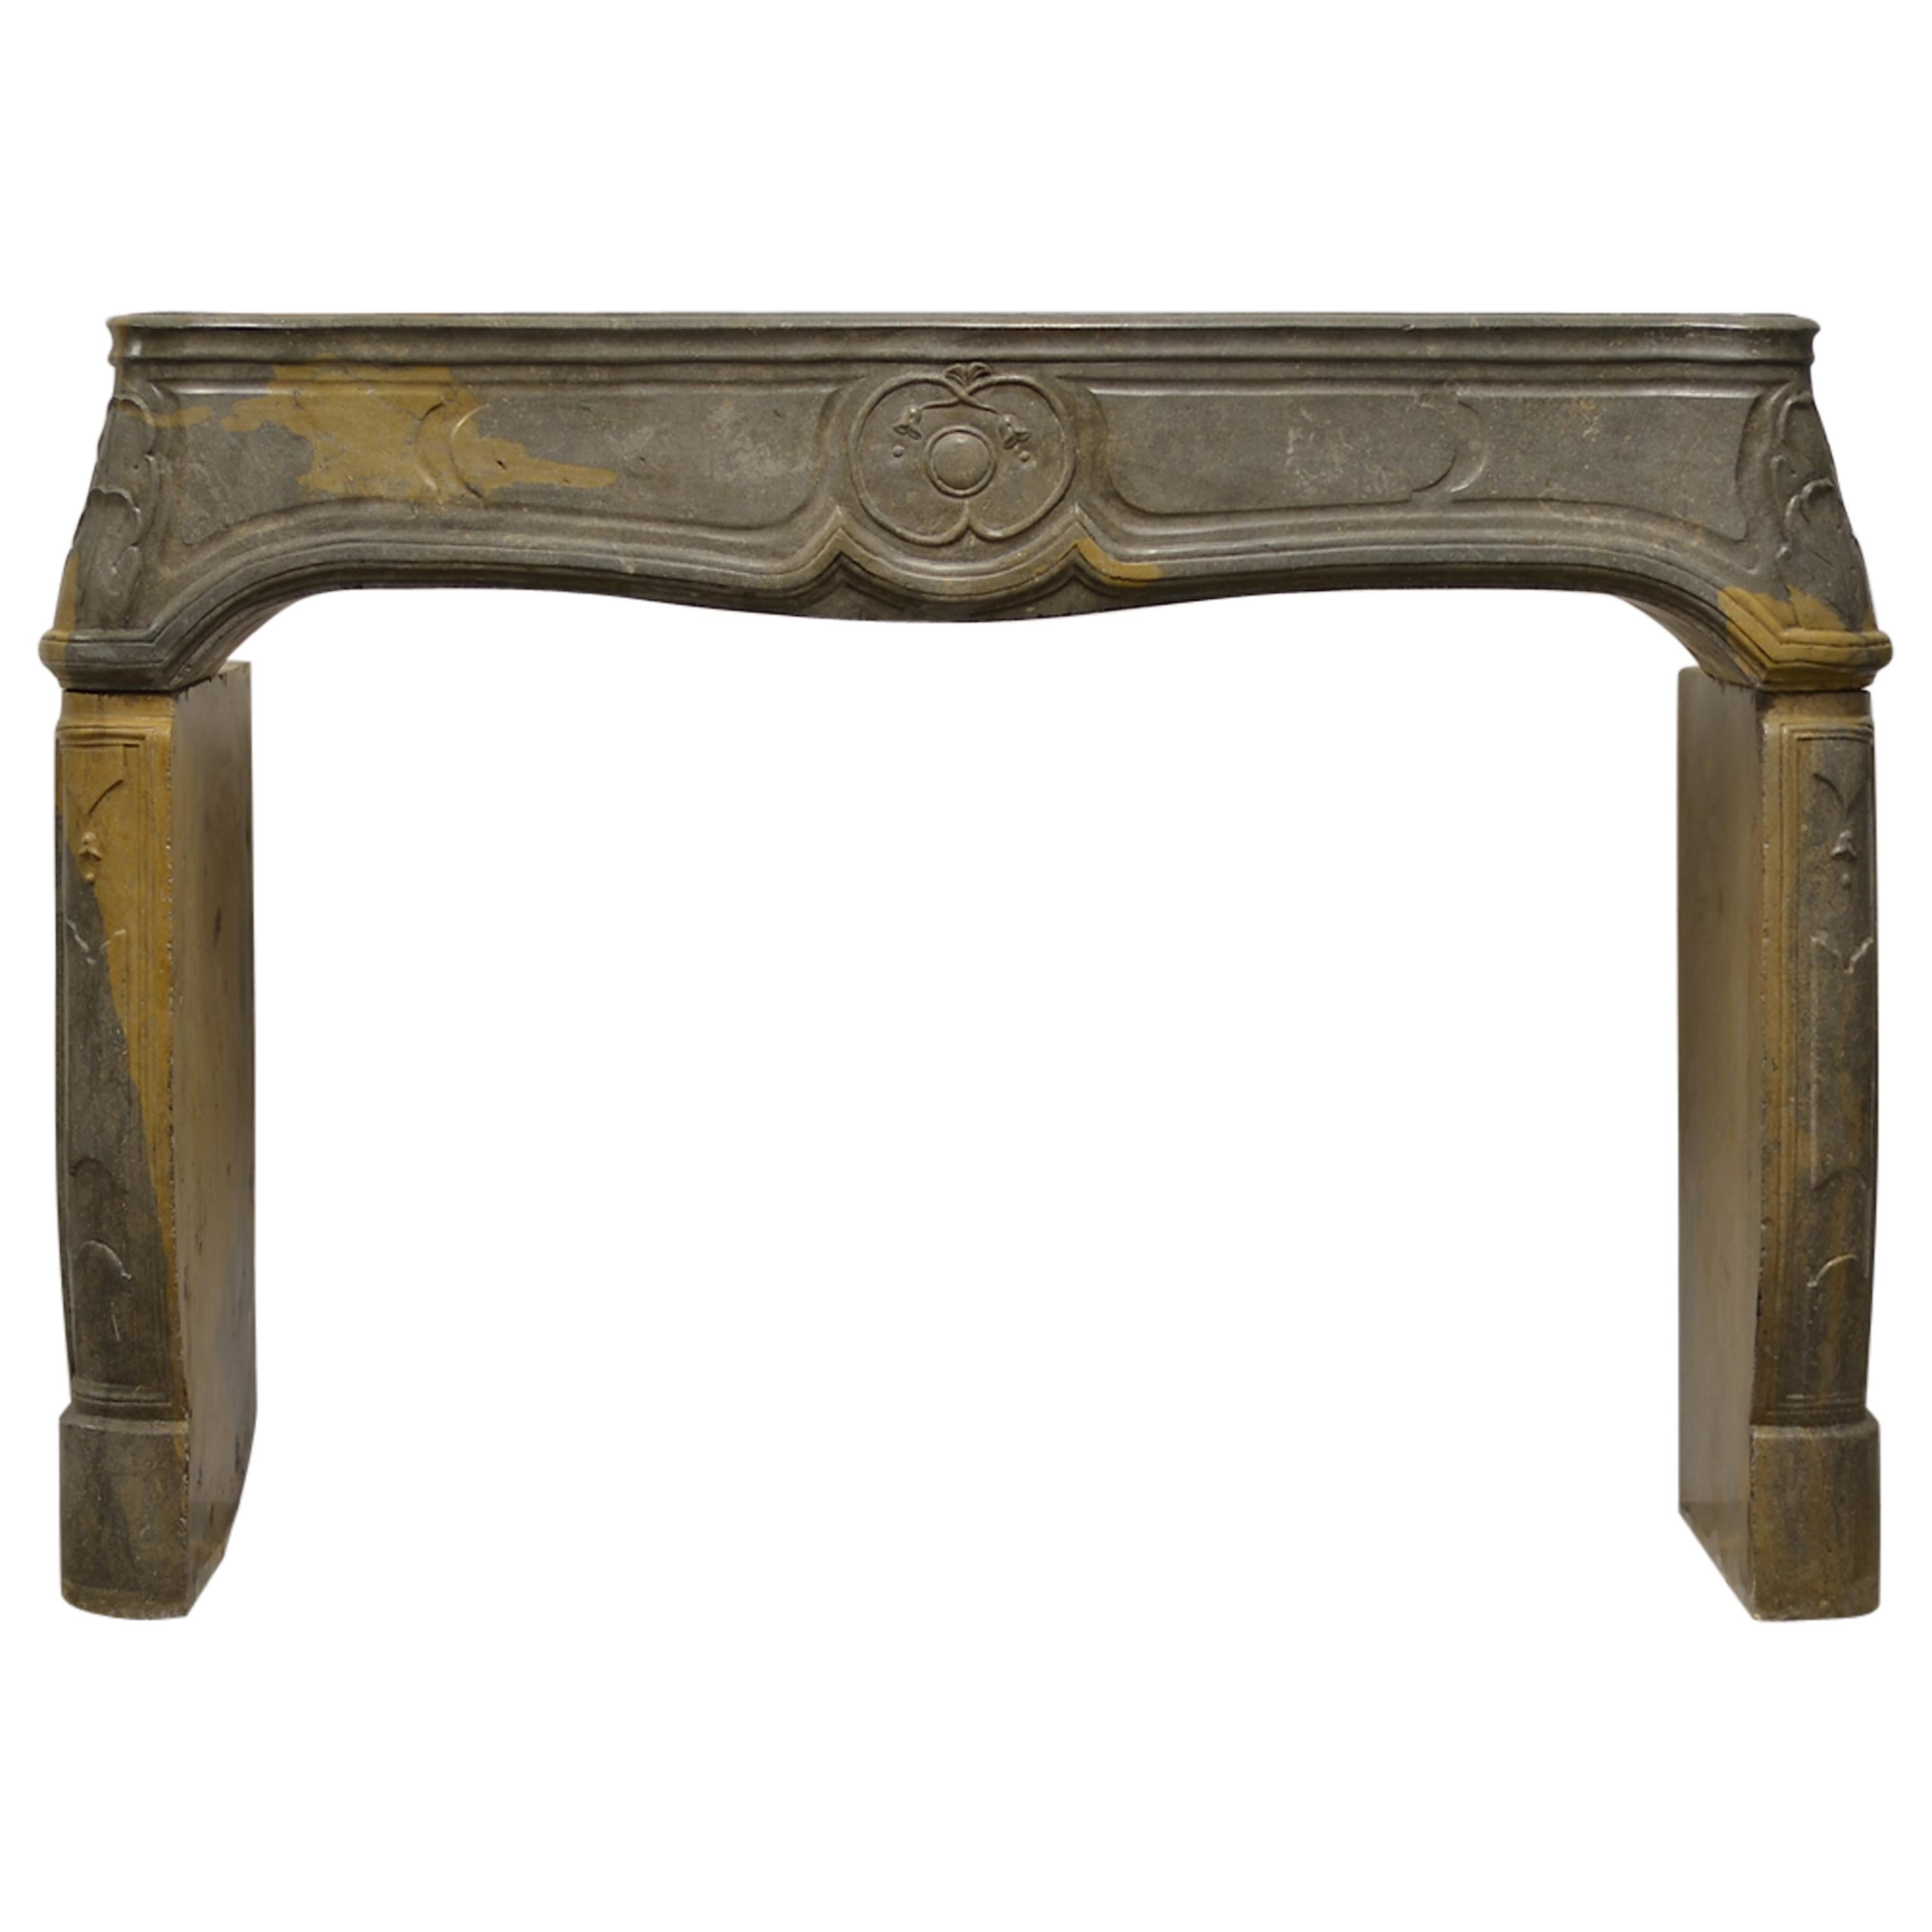 Antique French Louis XV Fireplace Mantel